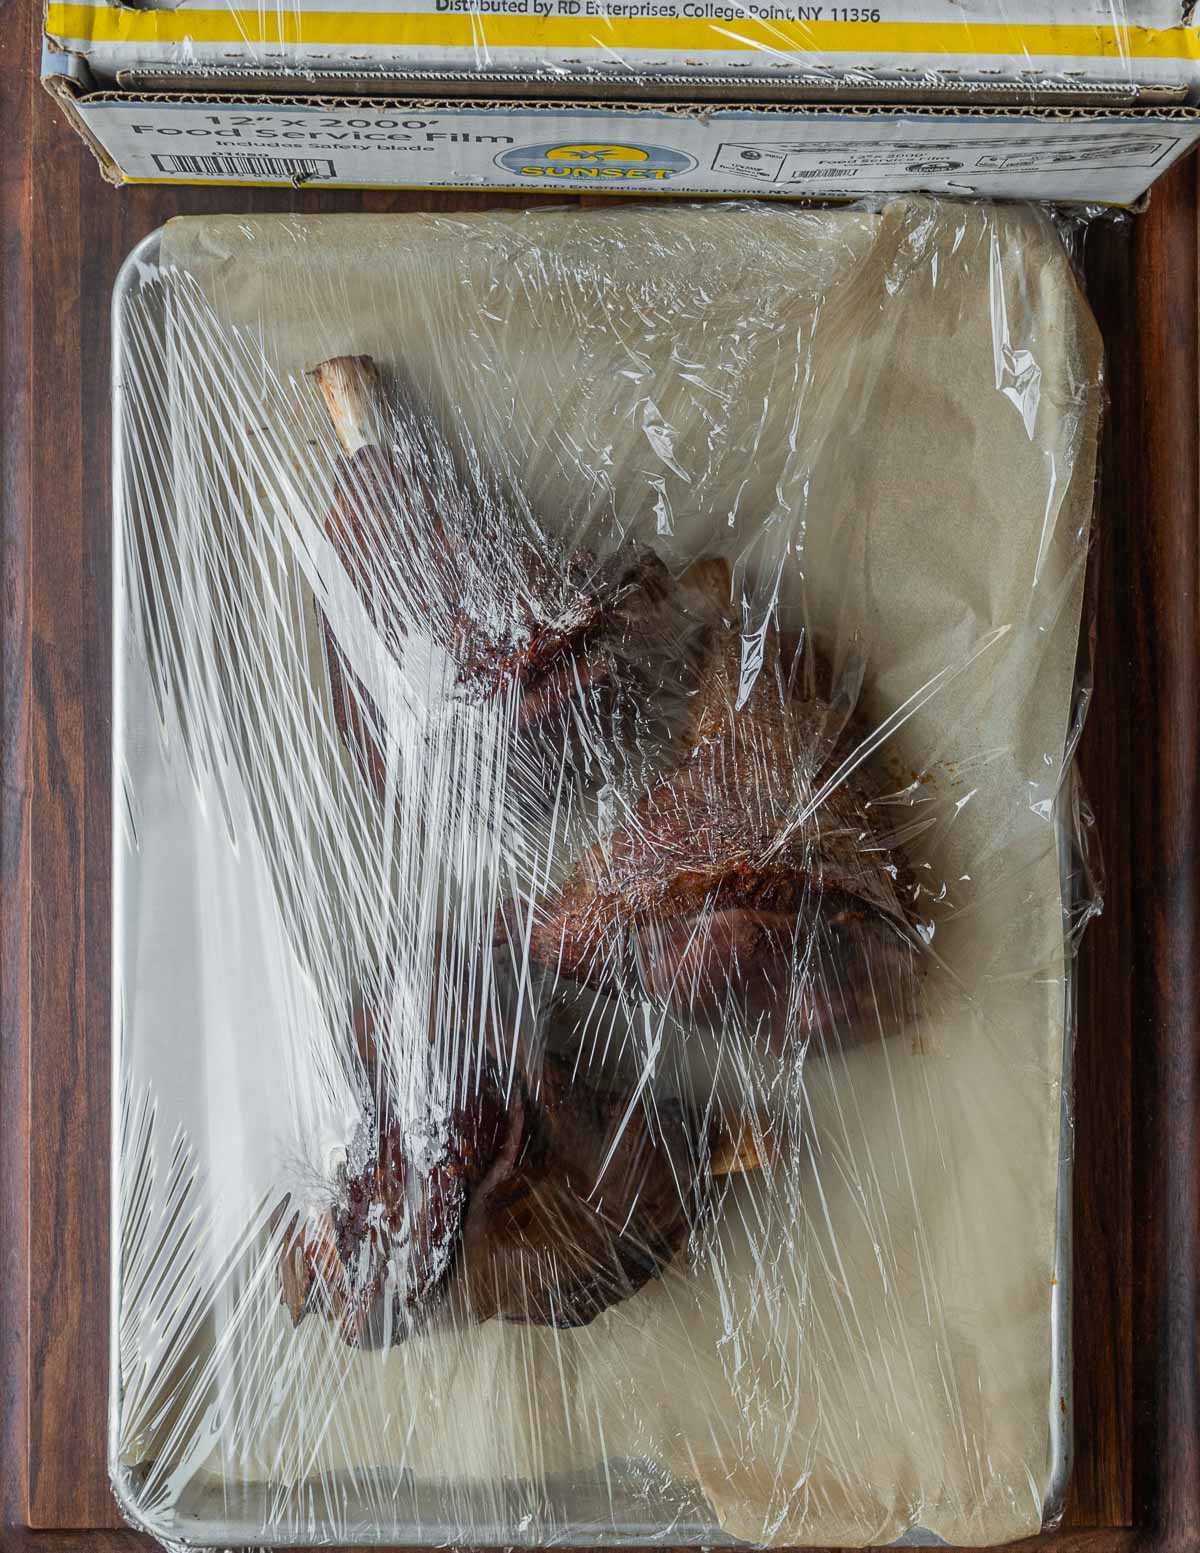 Smoked lamb shanks on a tray lined with parchment wrapped in cling film.